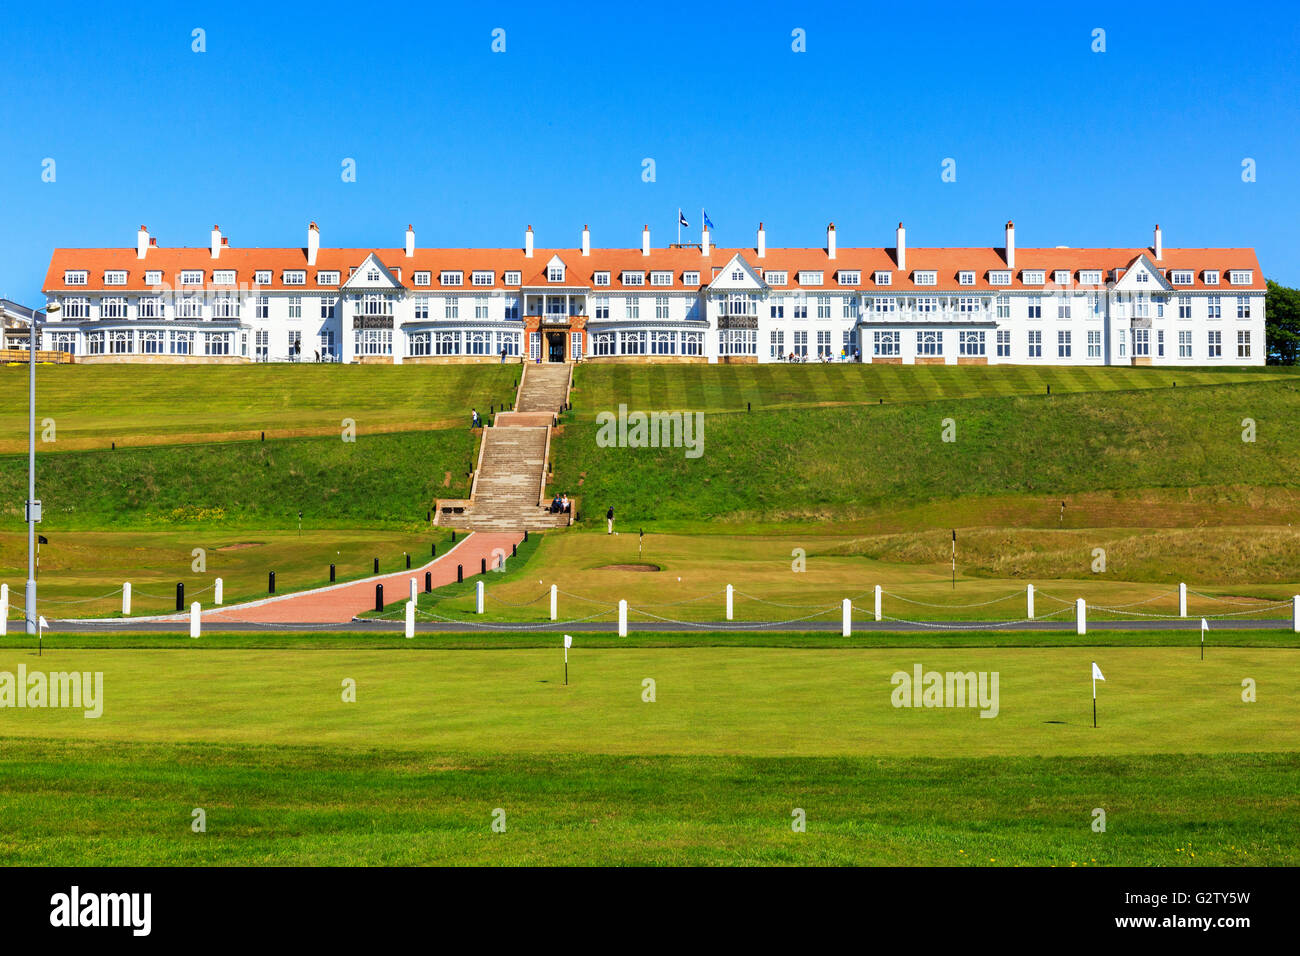 Trump hotel Turnberry, Ayrshire, Scotland, UK Banque D'Images